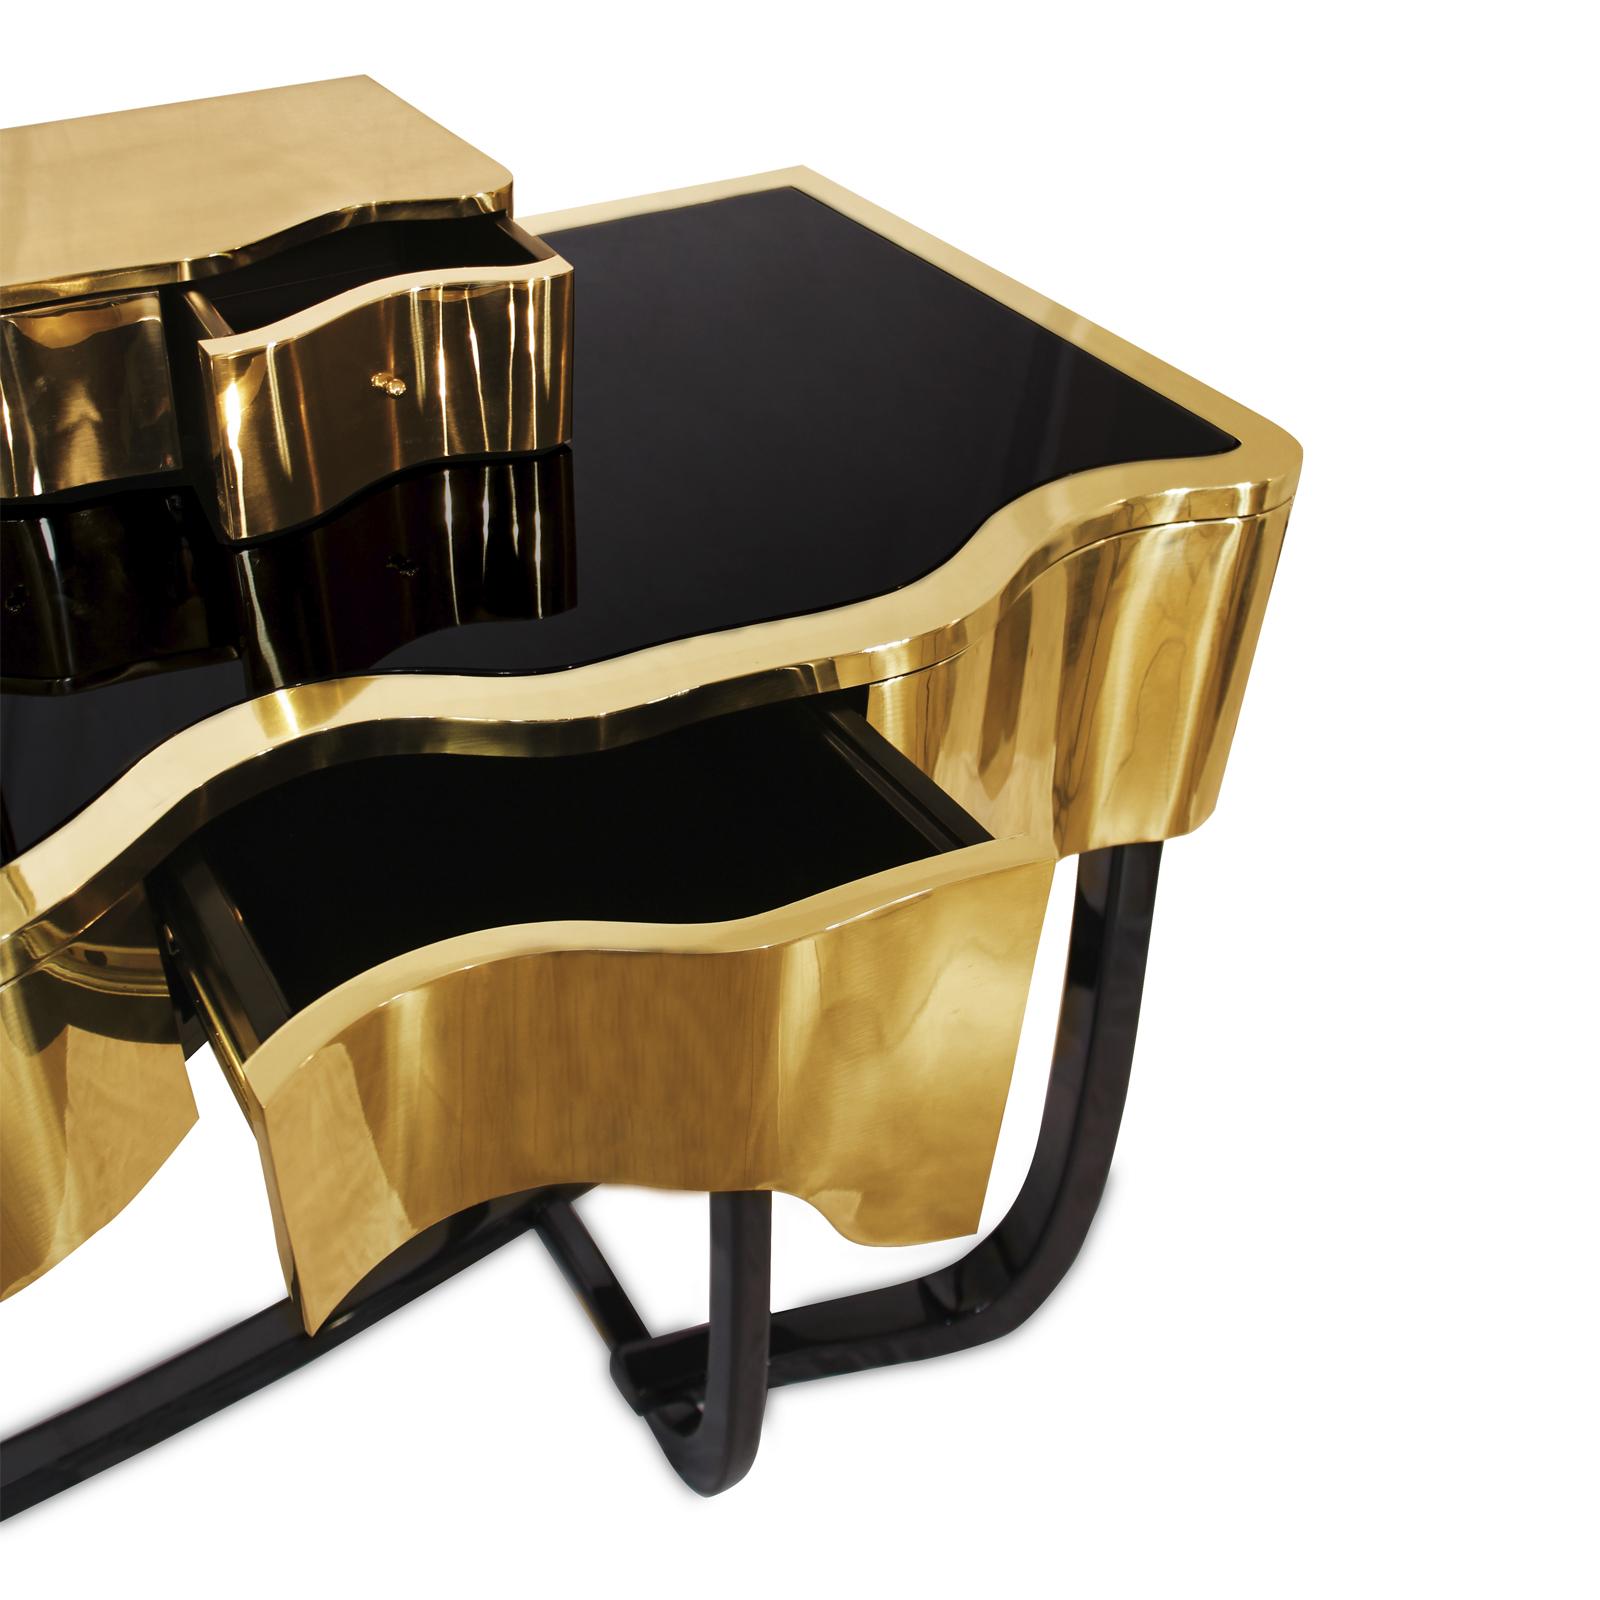 Curvy Mirror Room Console Table For Sale 1